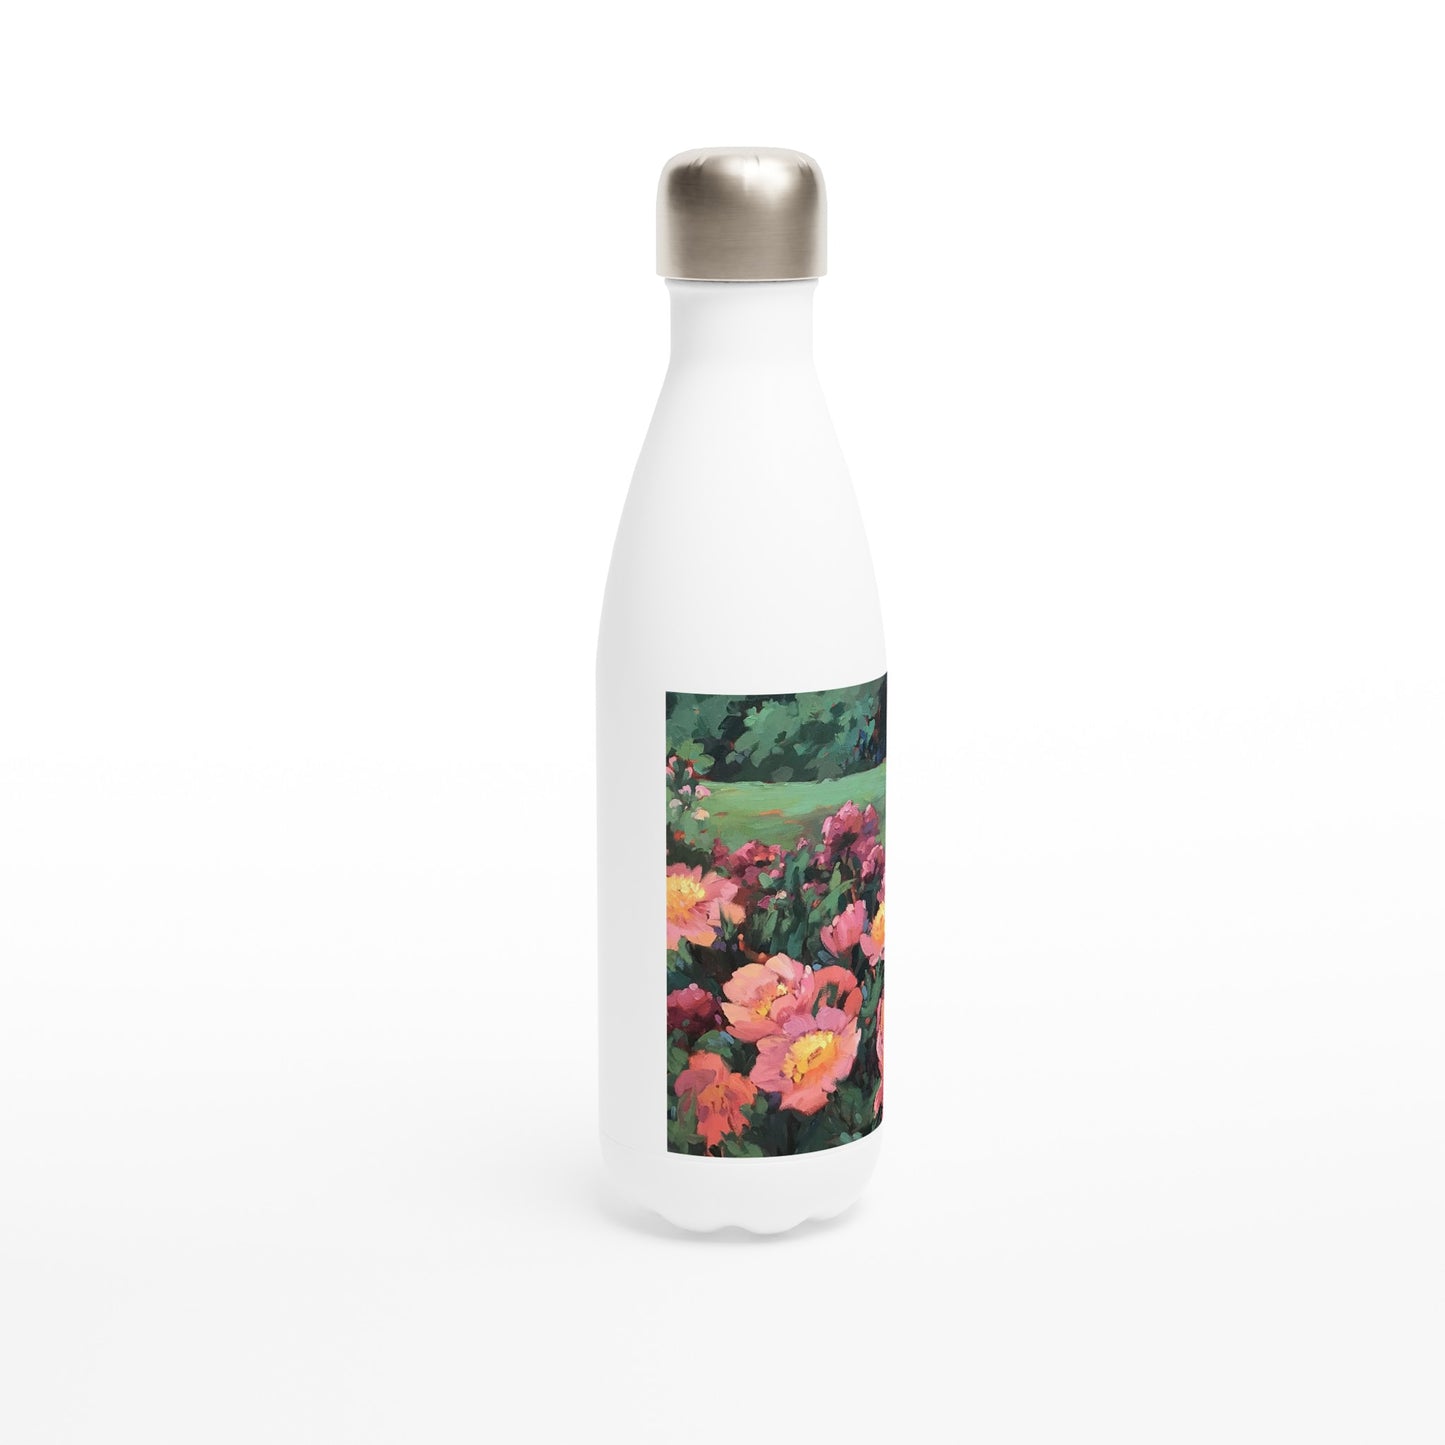 "Pink Princess" White 17oz Stainless Steel Water Bottle by Barbara Cleary Designs